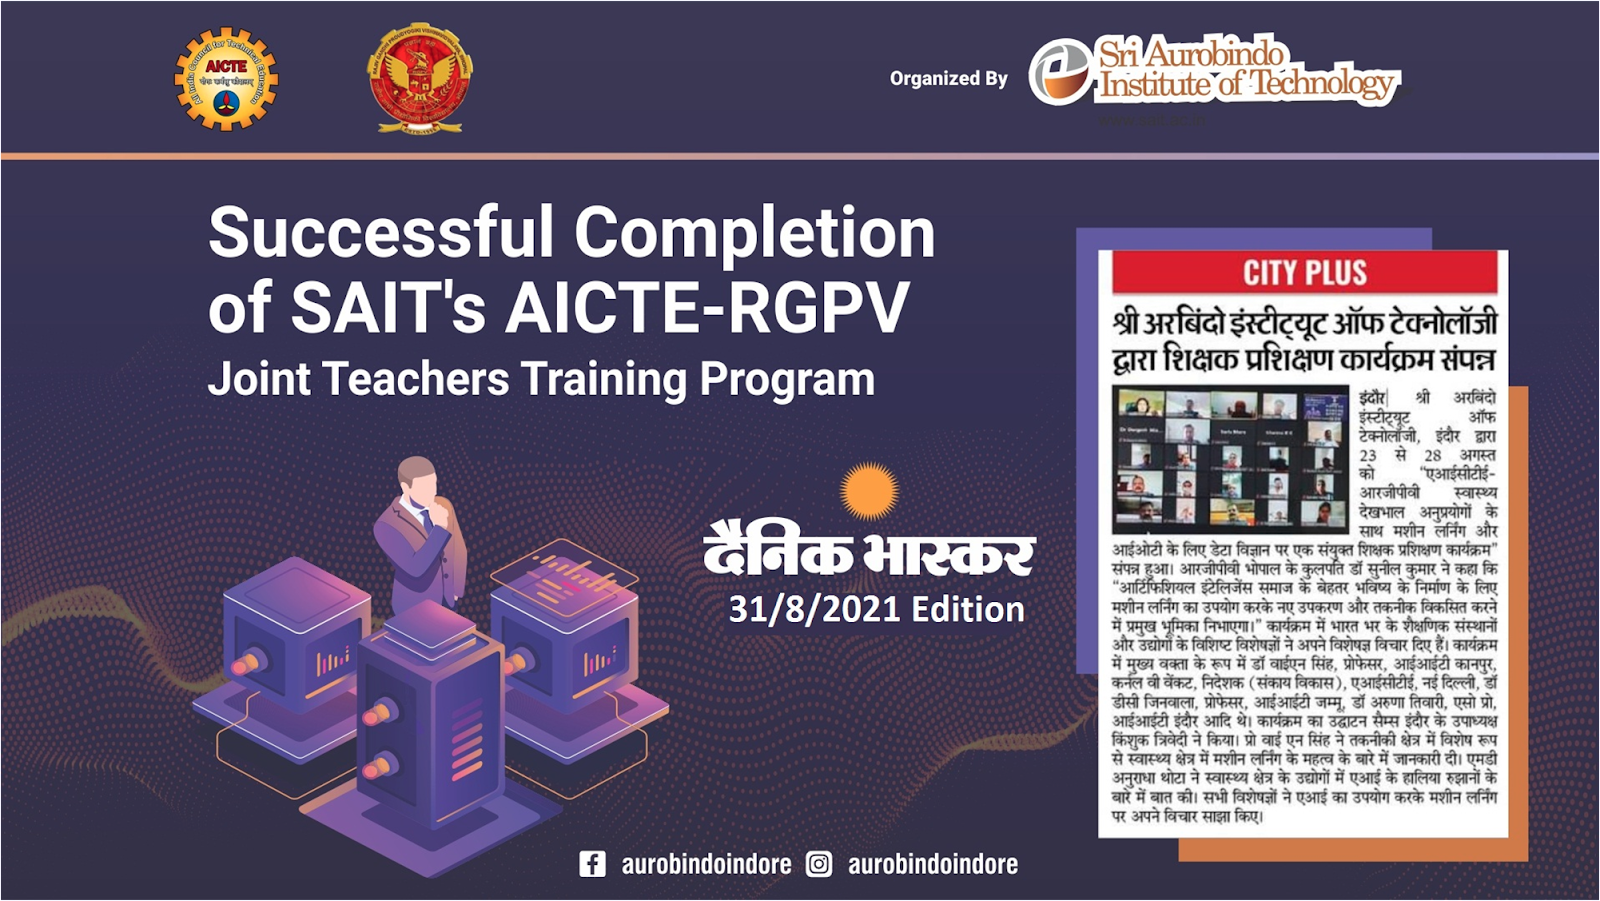 AICTE-RGPV Joint Teachers Training Program on Data Science for ML & IoT with Healthcare Applications